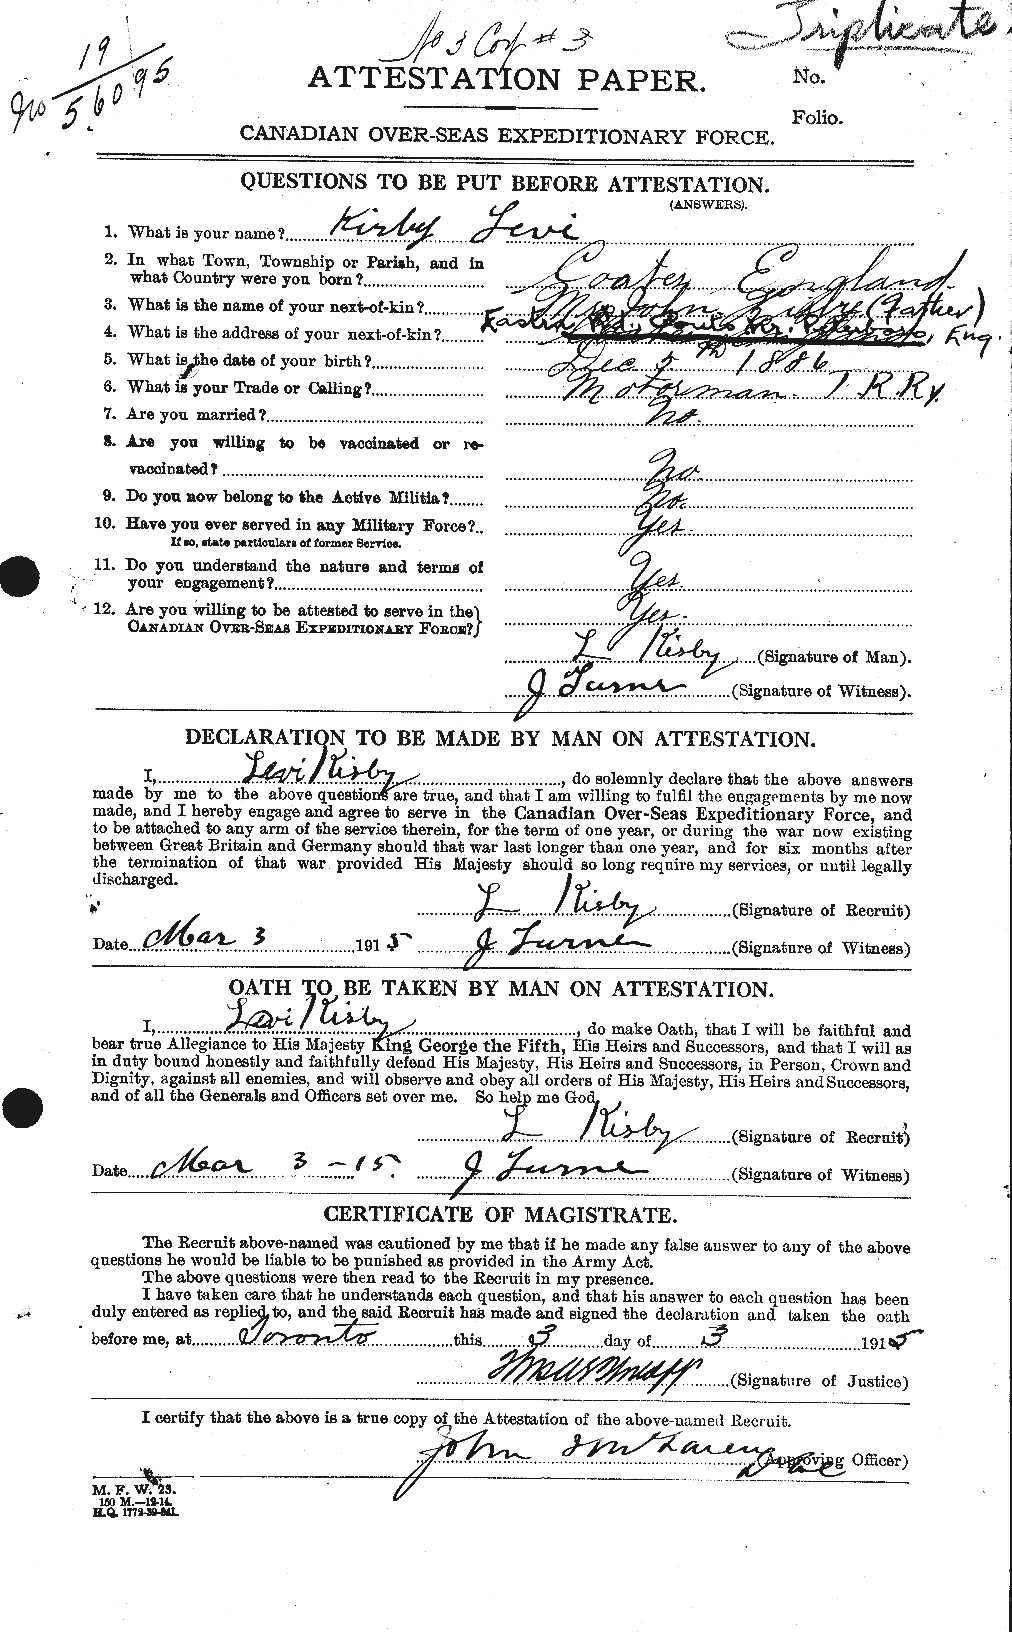 Personnel Records of the First World War - CEF 437250a